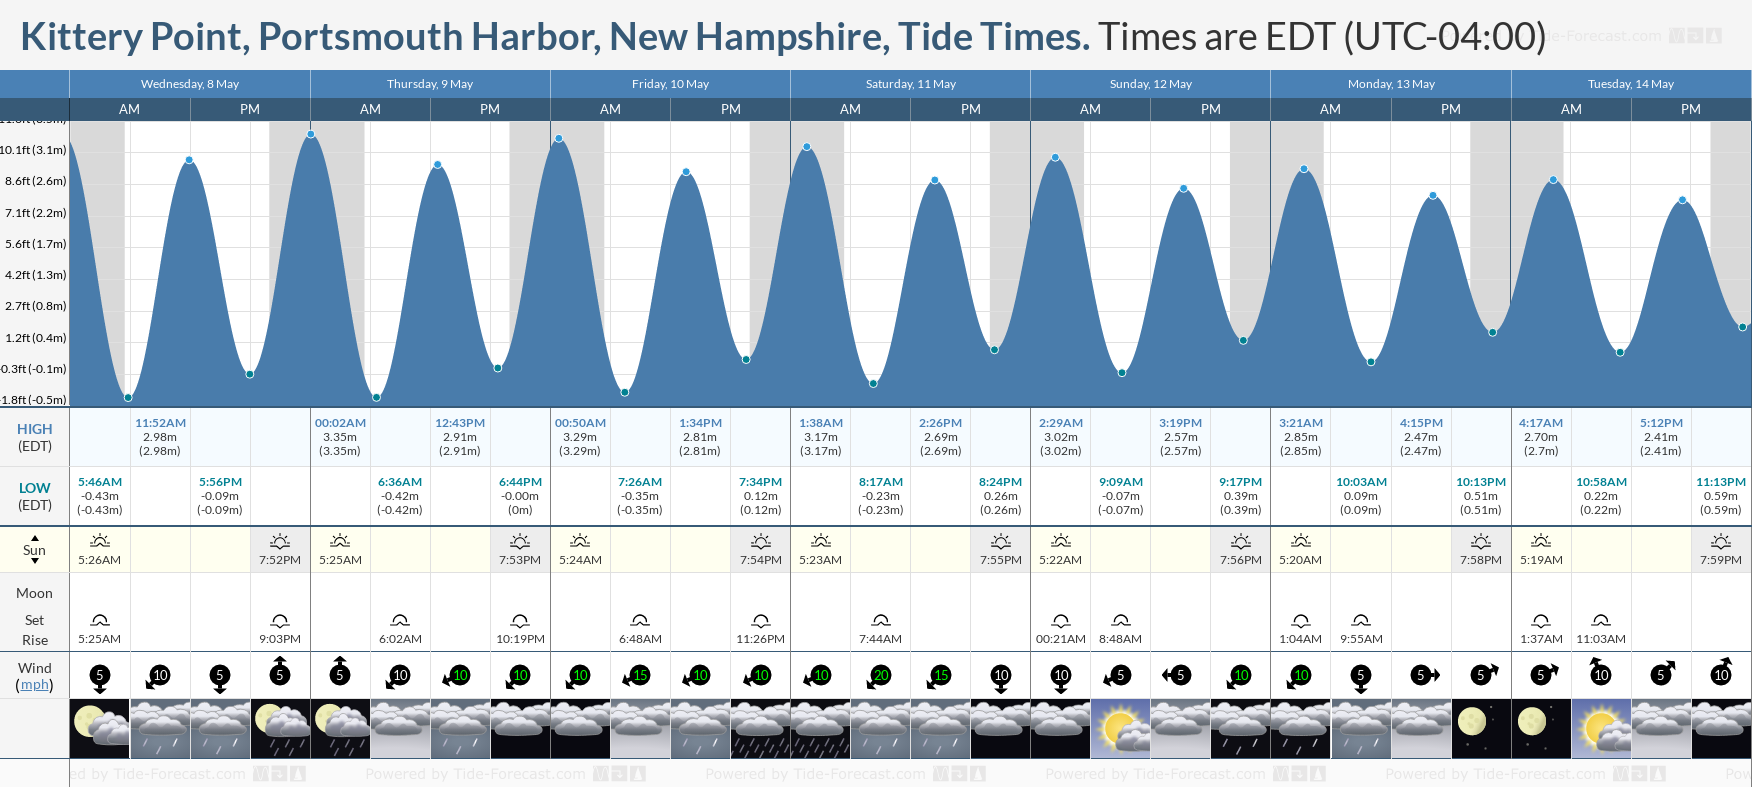 Kittery Point, Portsmouth Harbor, New Hampshire Tide Chart including high and low tide times for the next 7 days